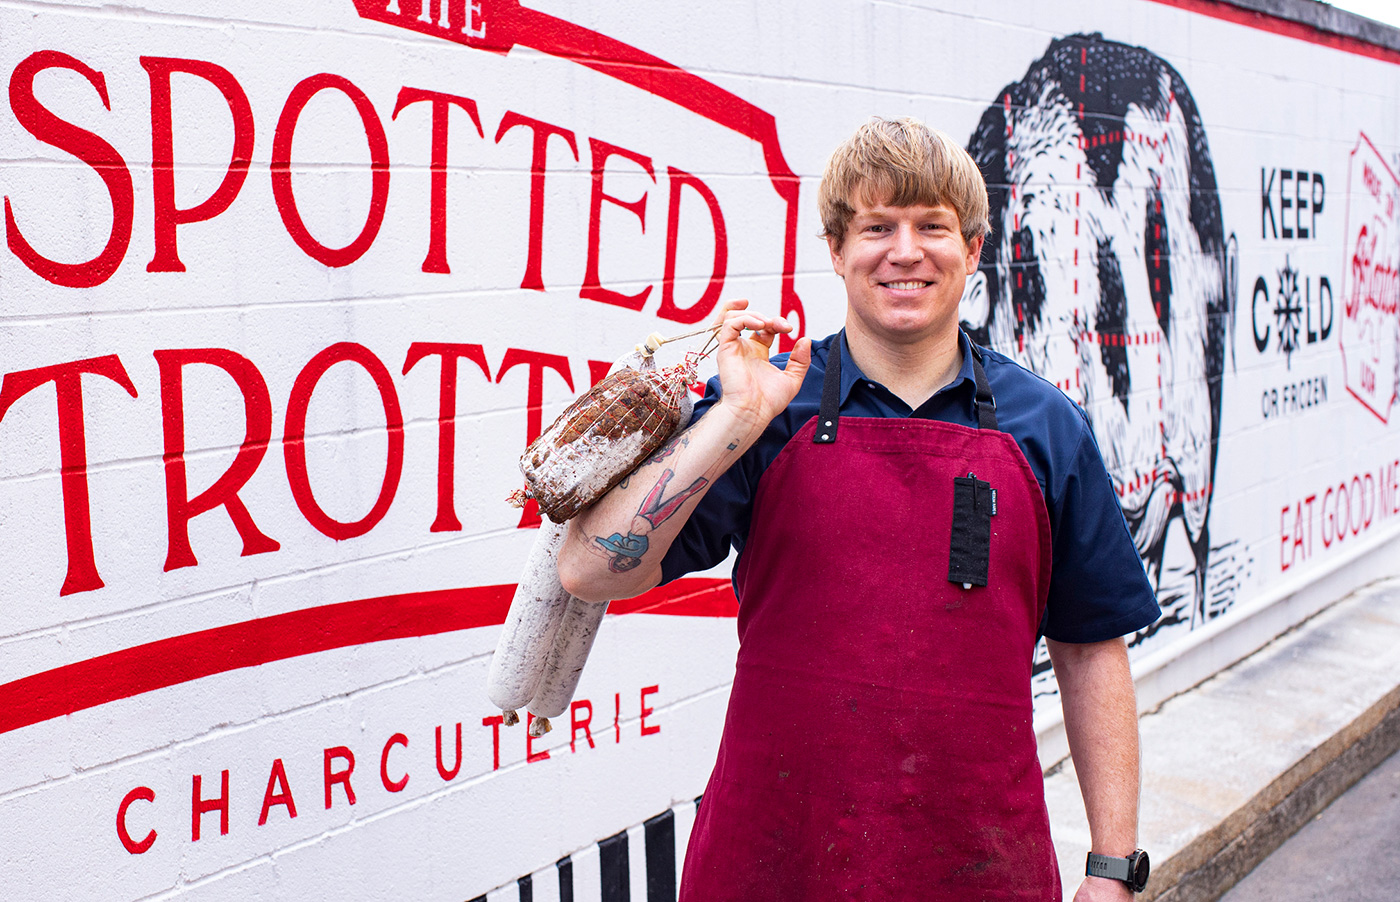 Kevin Ouzts of The Spotted Trotter